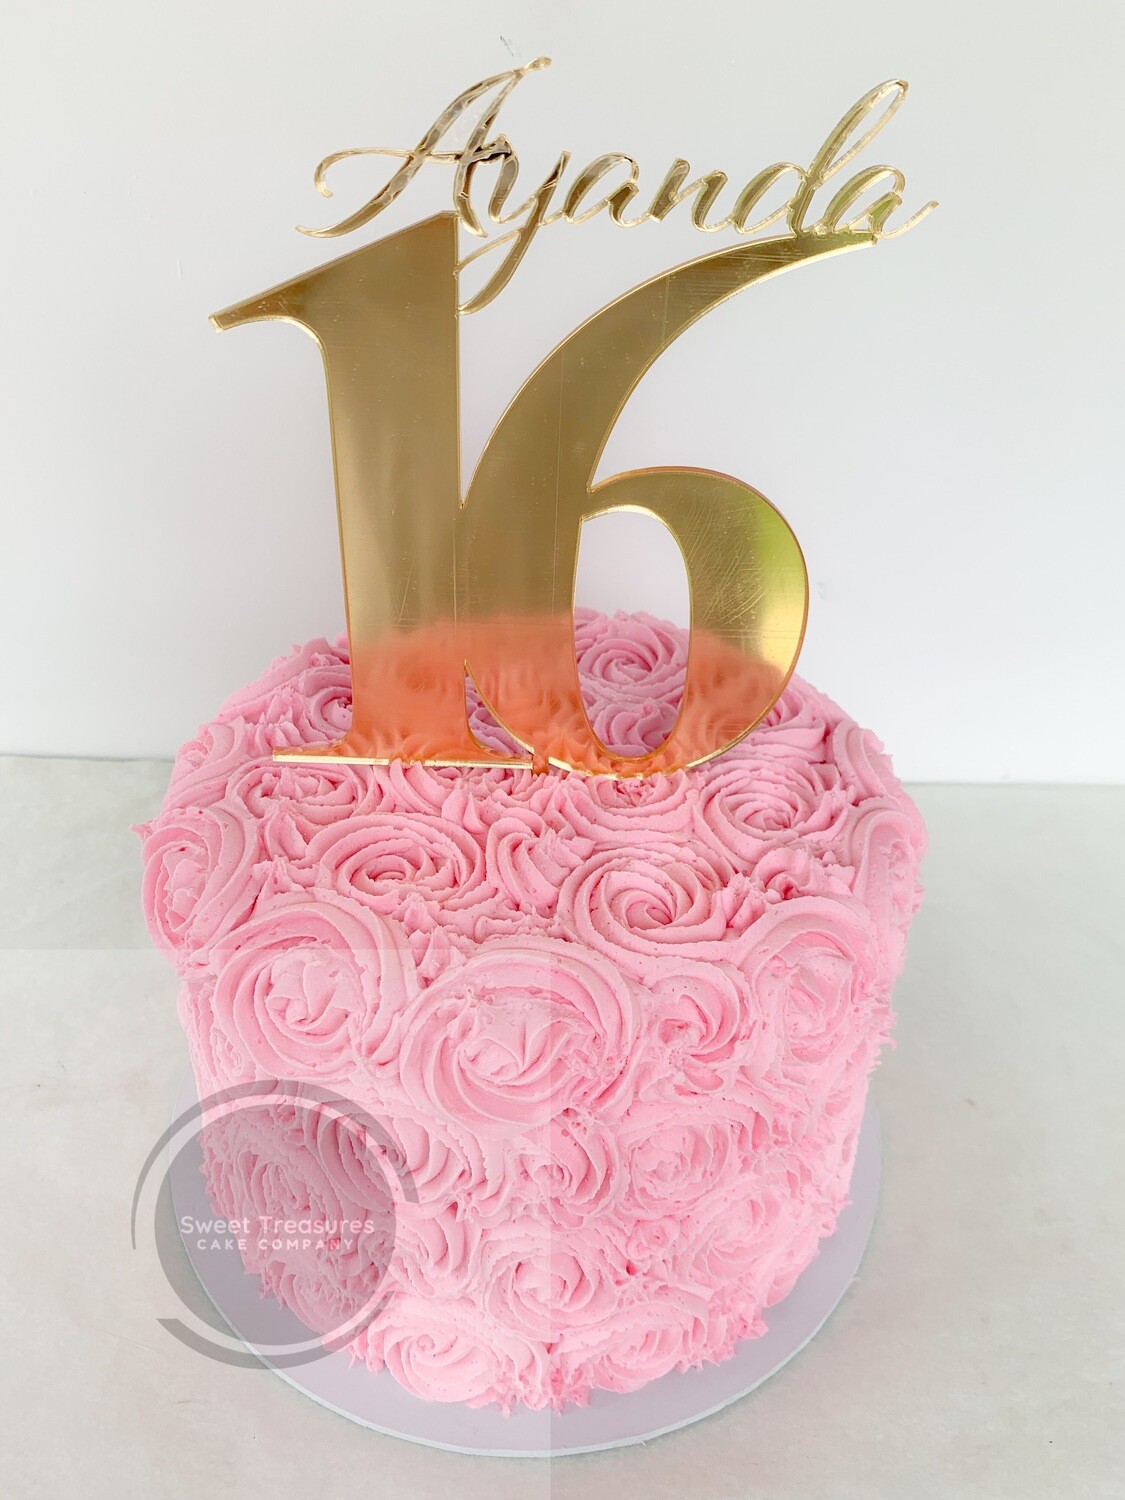 Sweet 16 cakes Archives - Patty's Cakes and Desserts